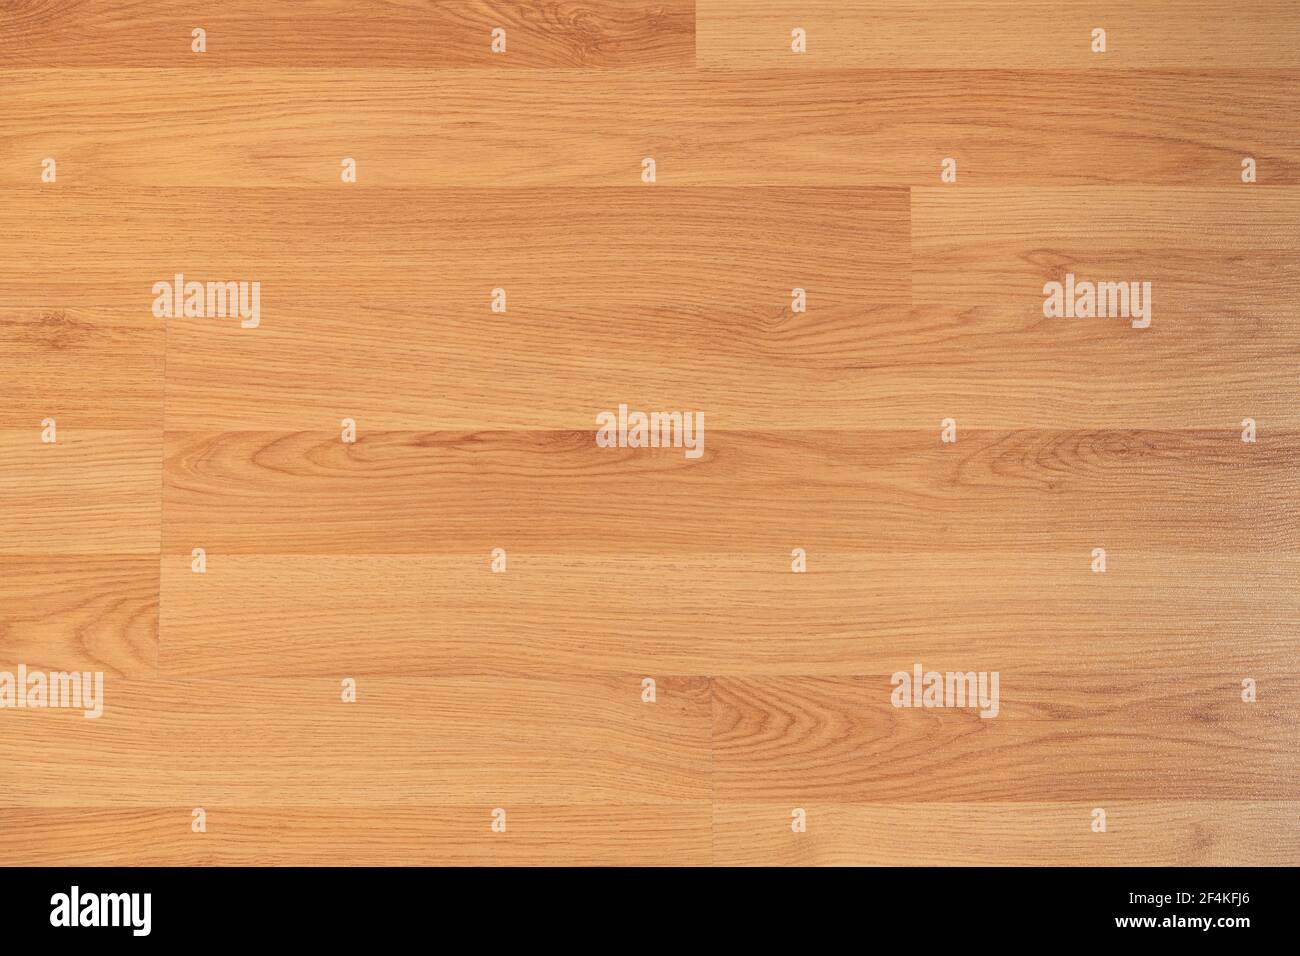 Laminate wooden parquet floor background. Abstract background Stock Photo